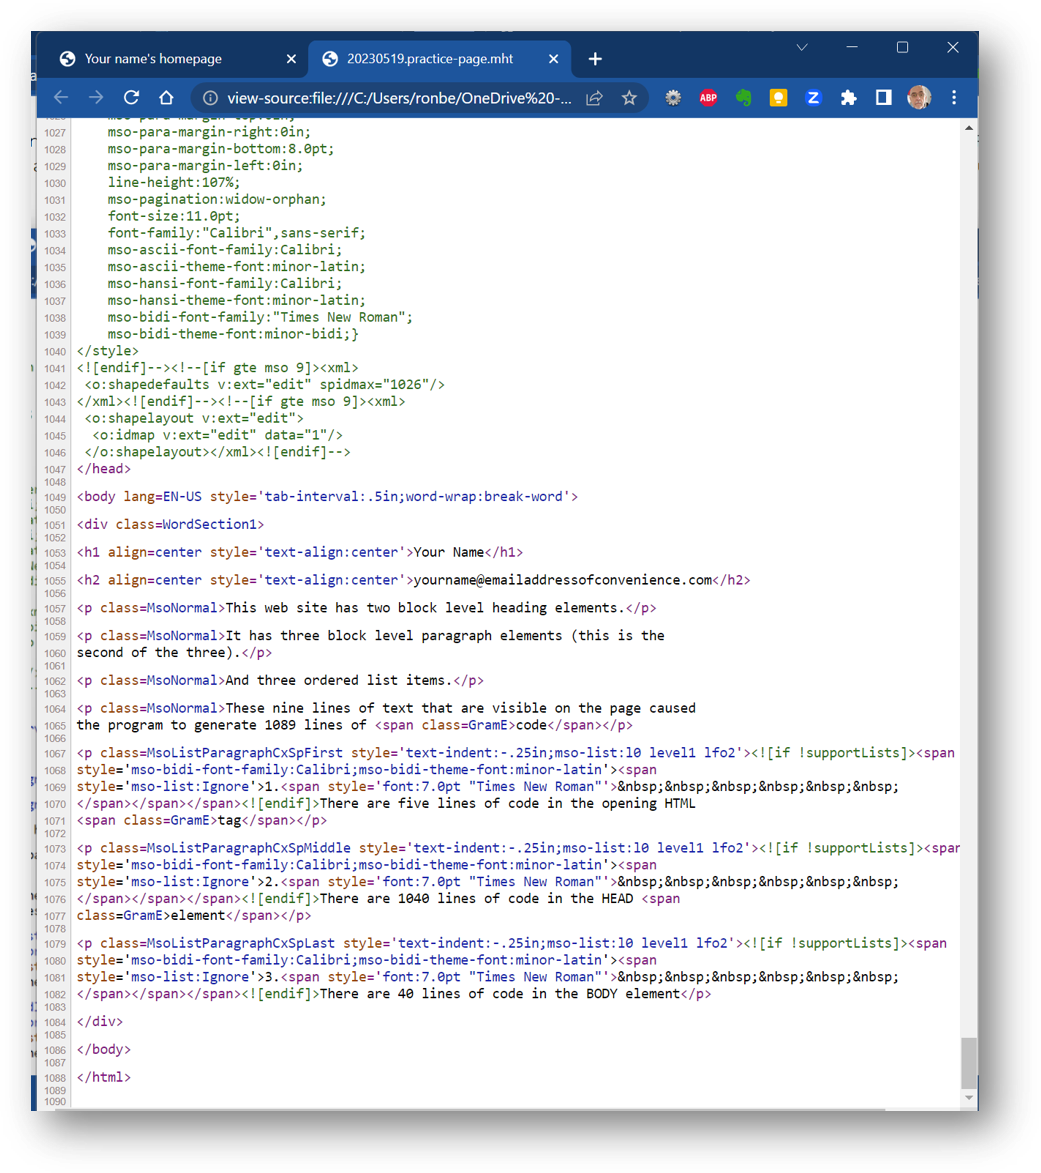 an image of what the practice page code looks like in Chrome